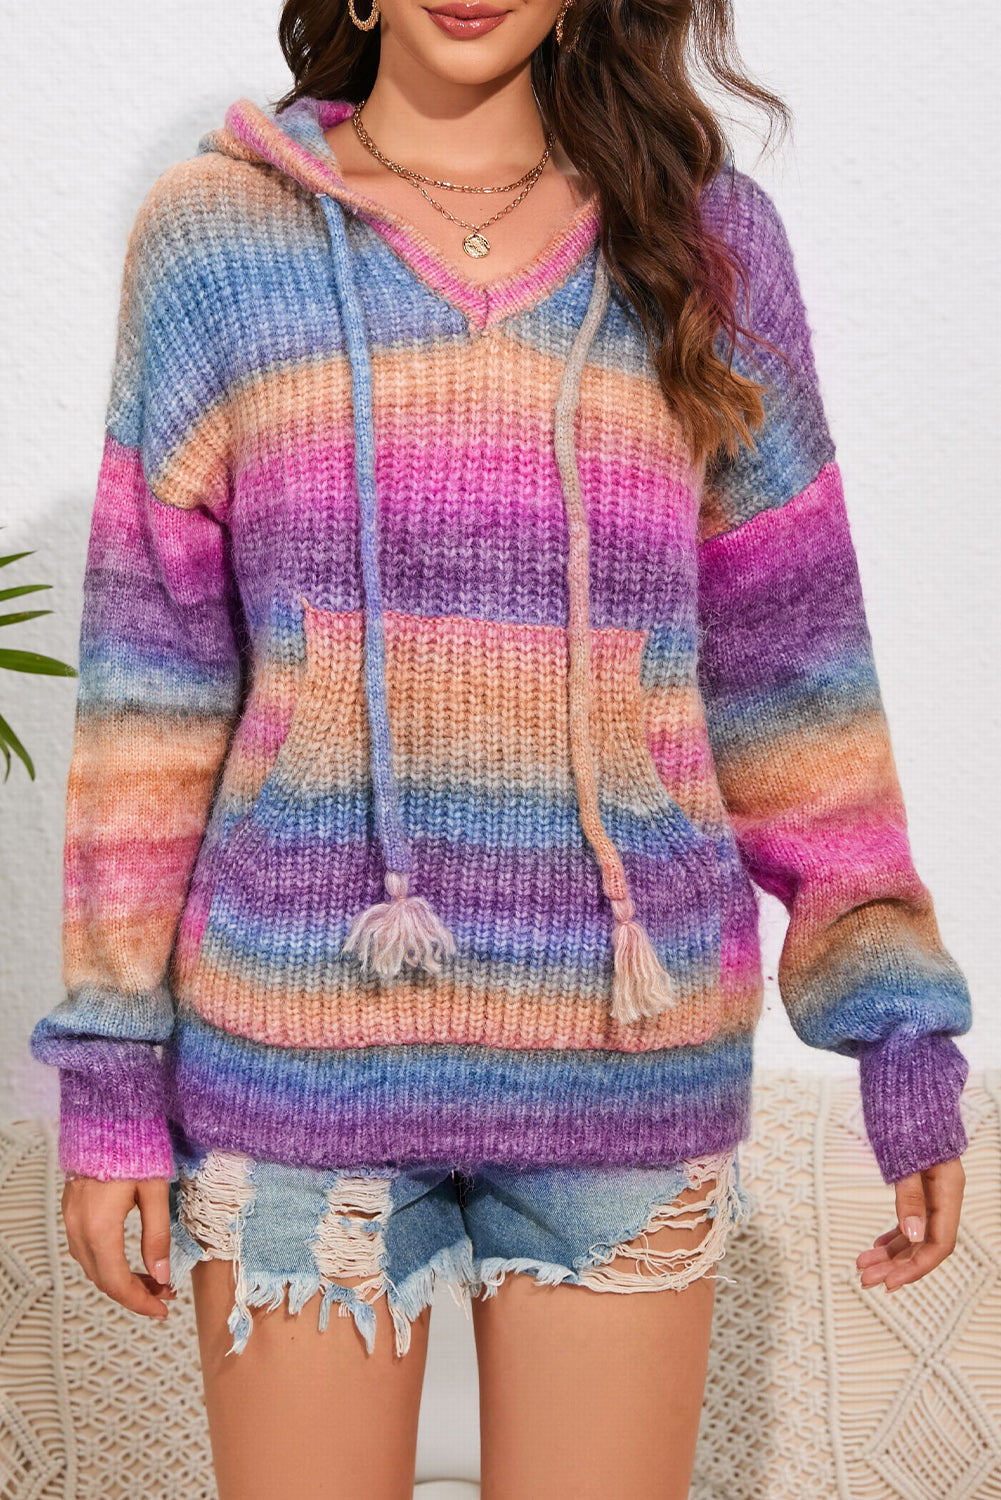 Multicolor Ombre Kangaroo Pocket Hooded Sweater